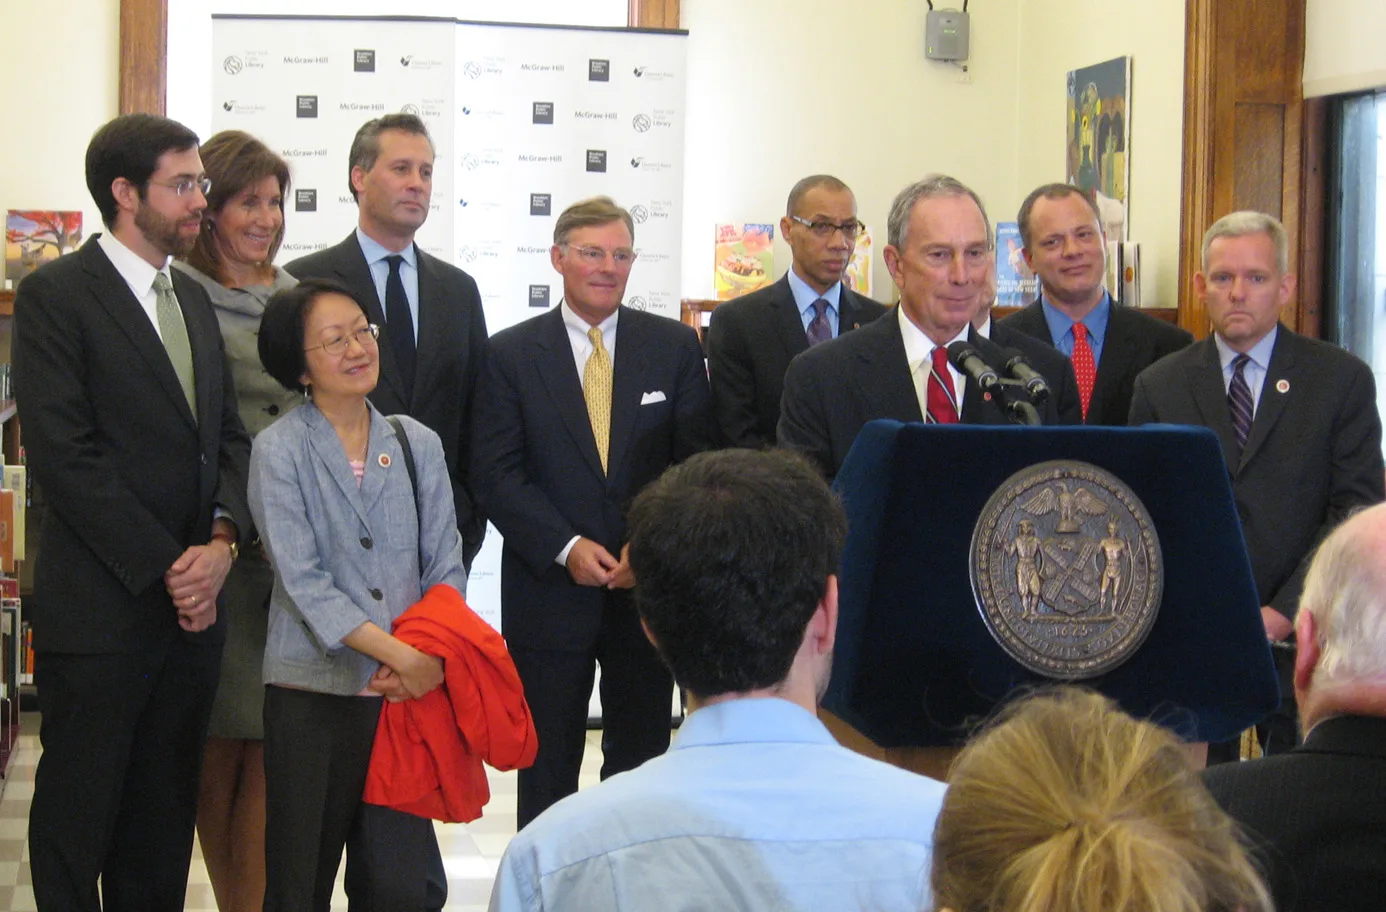 Mayor Michael Bloomberg speaks at New York Pulic Library press conference